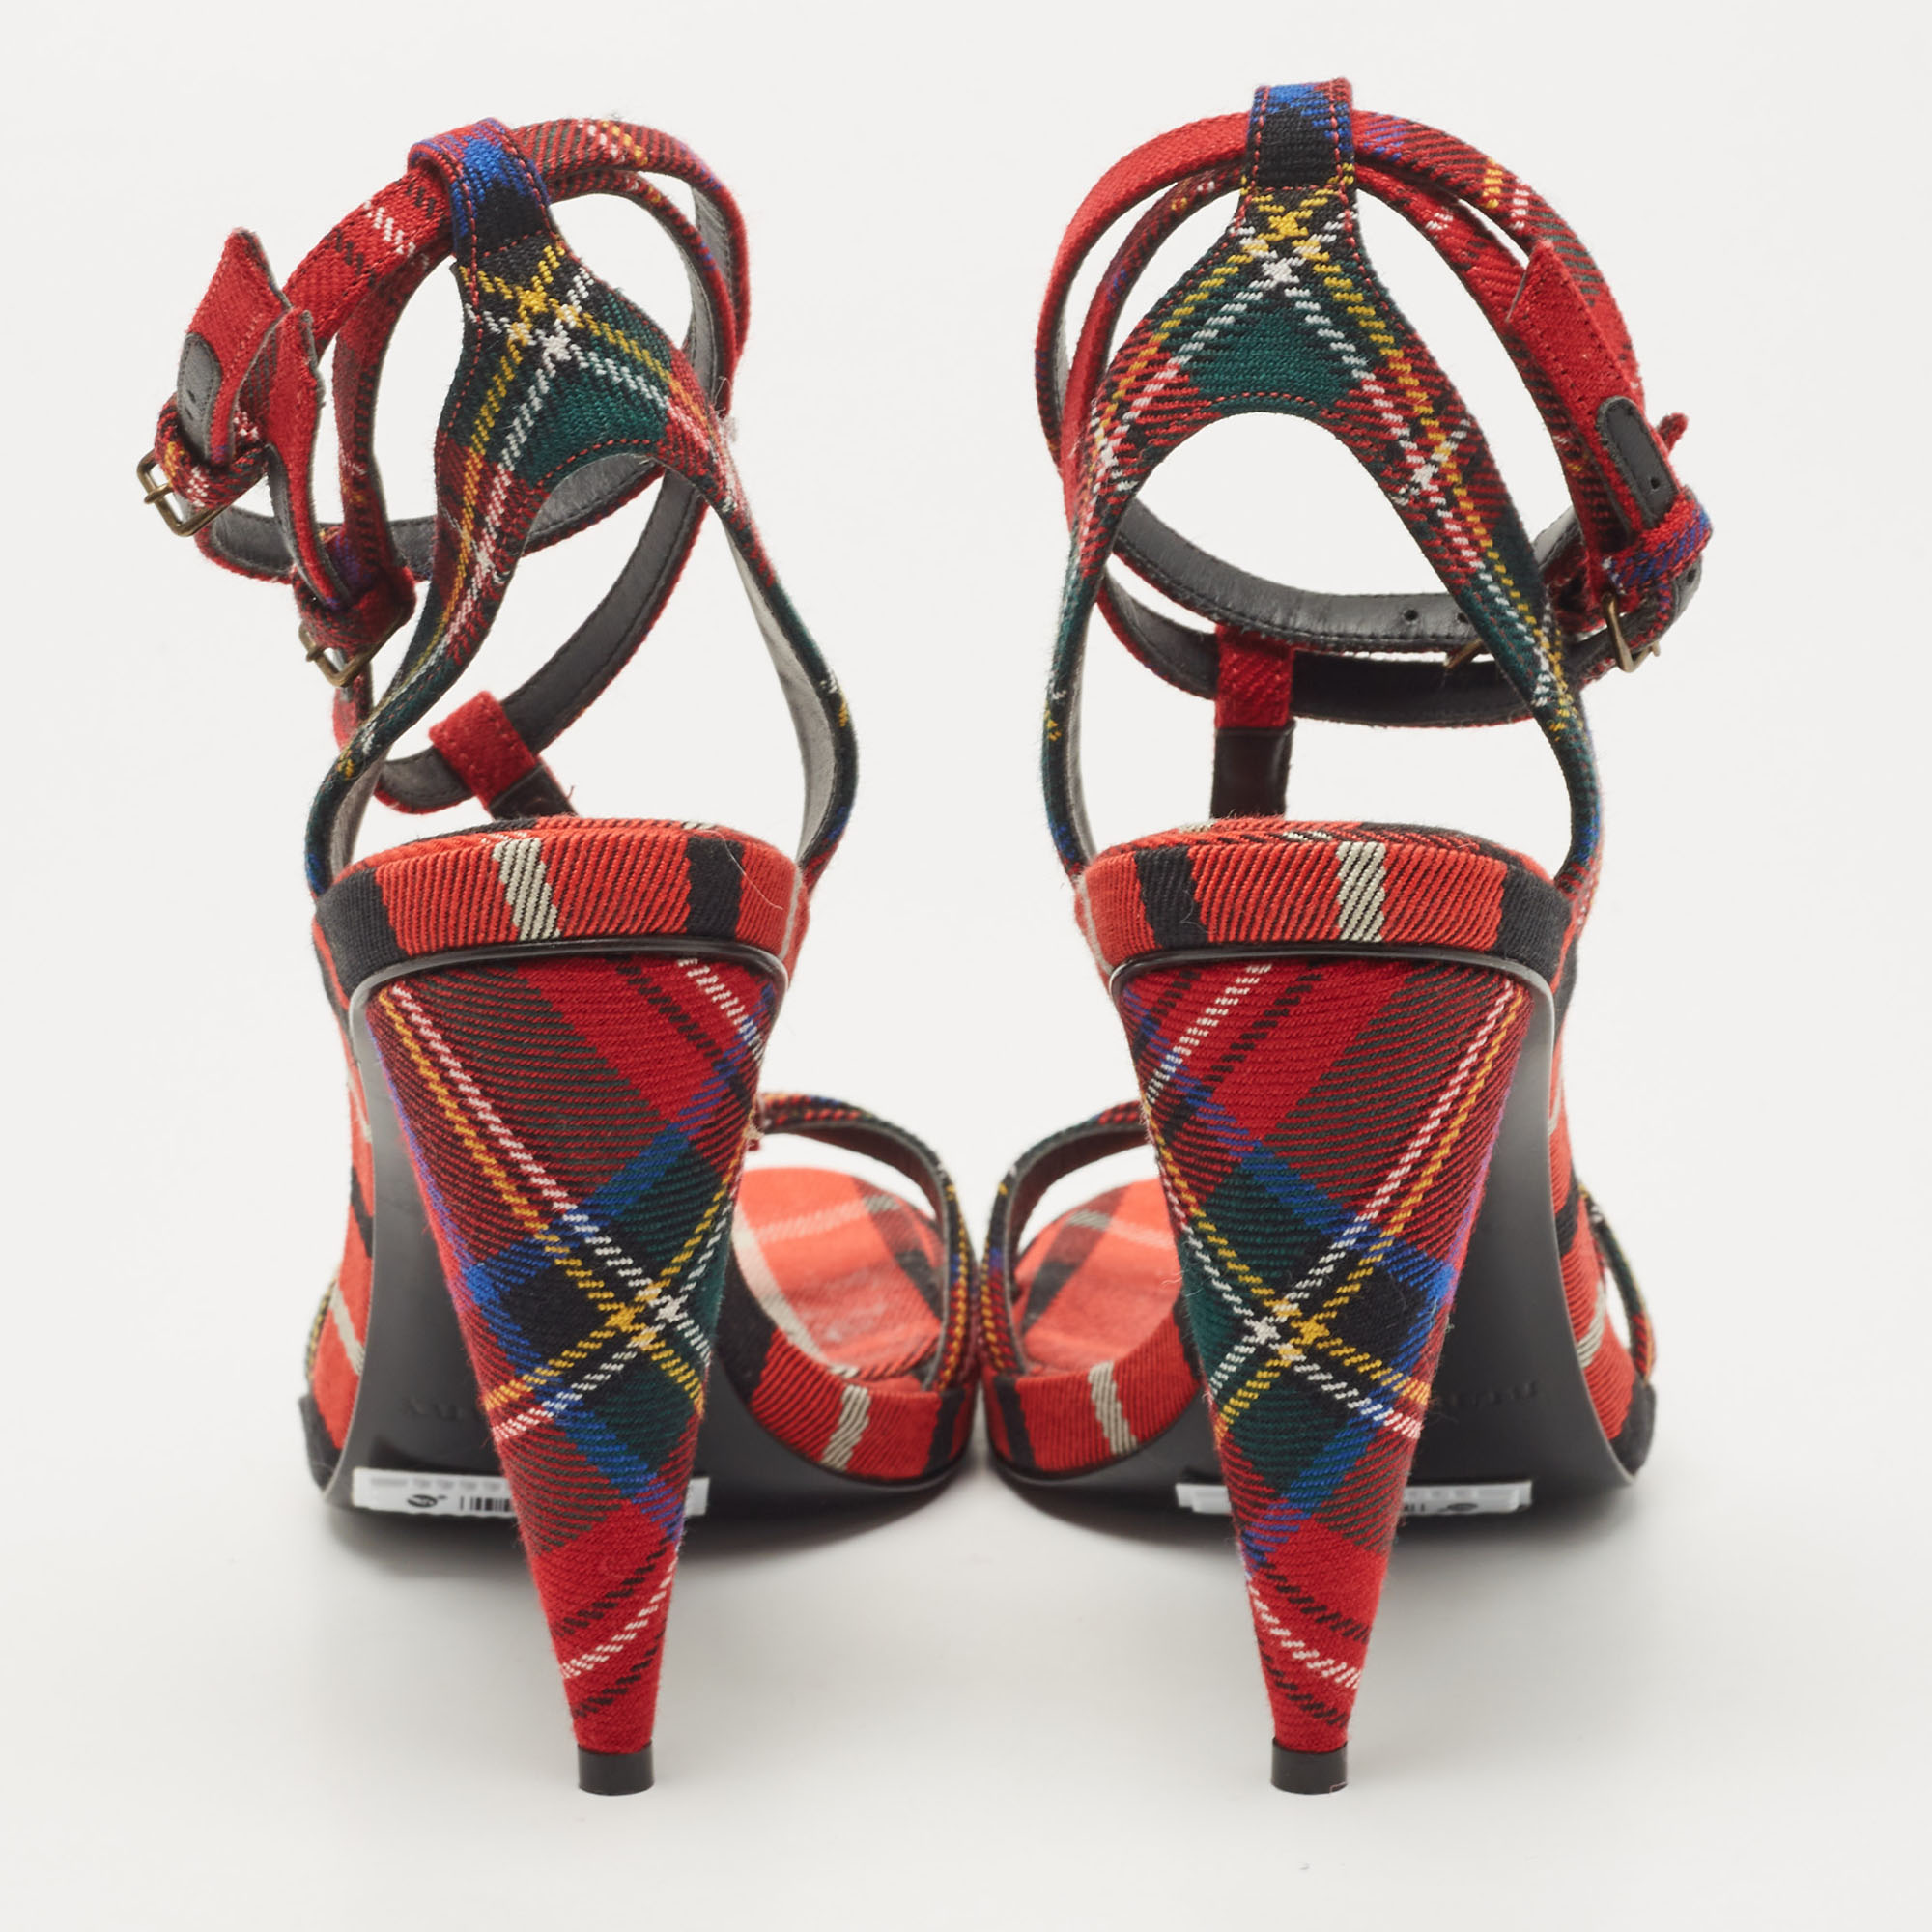 Burberry Red Checkered Canvas Hans T Strap Sandals Size 38.5